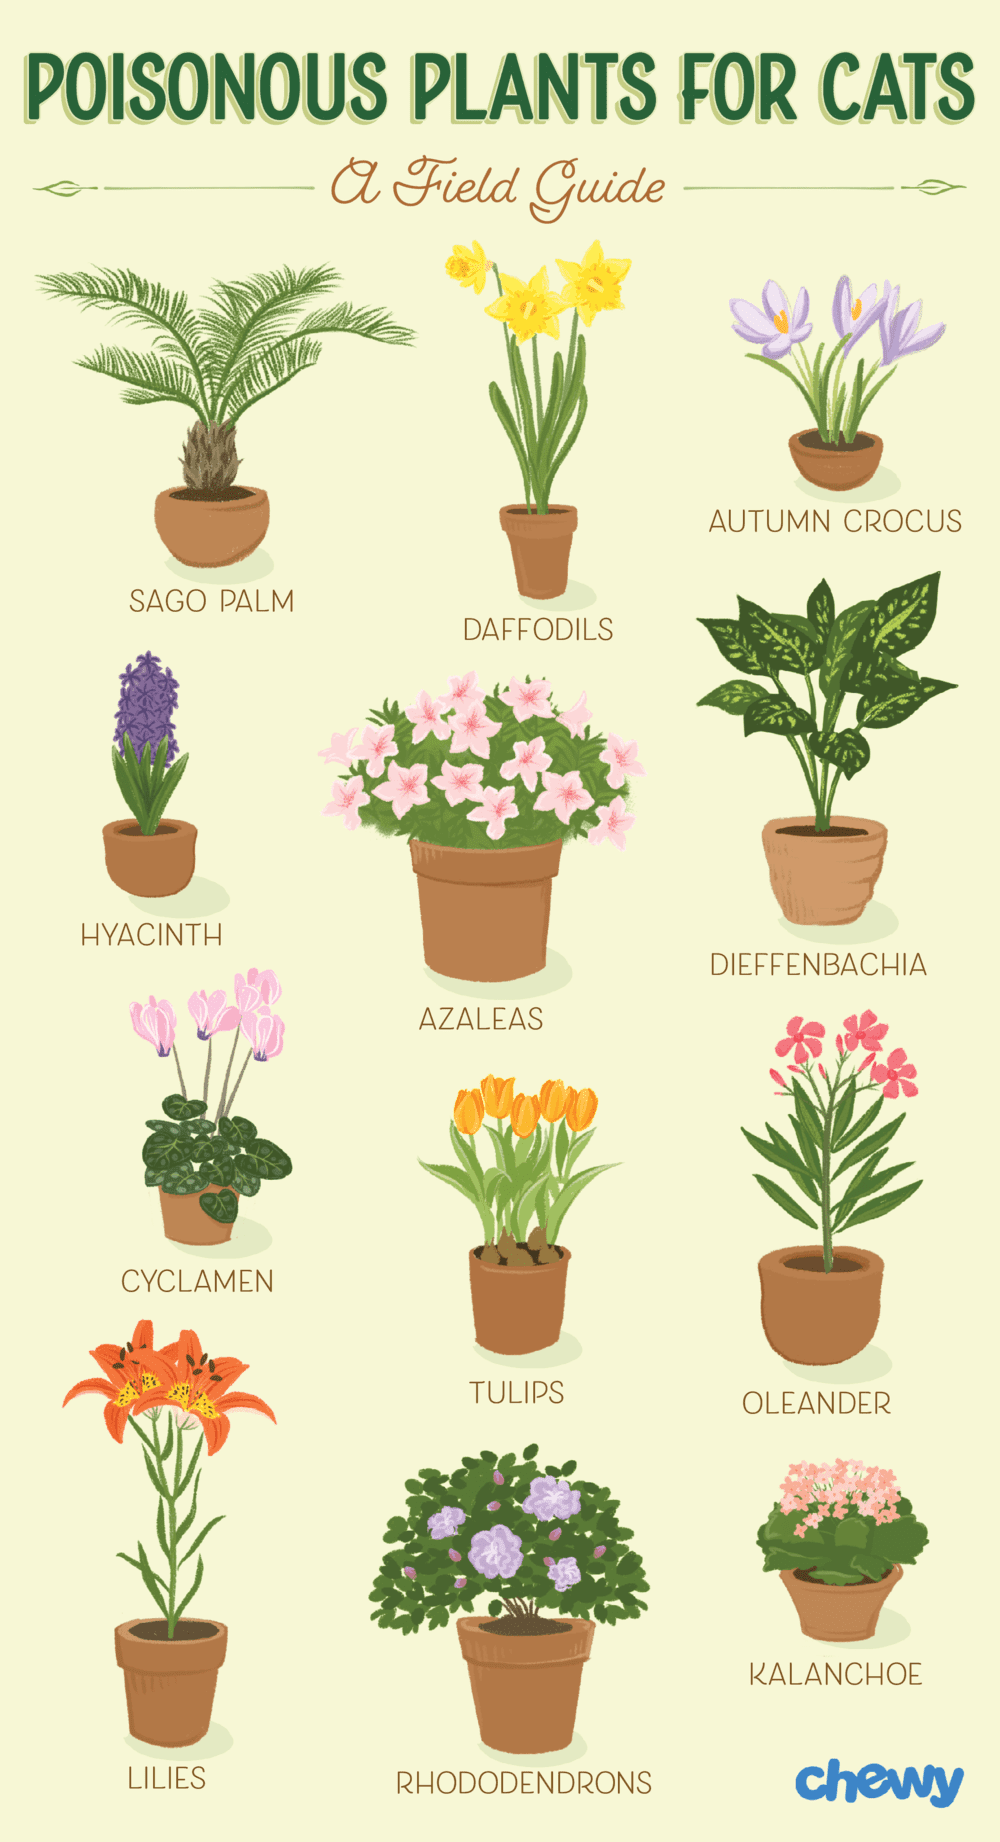 Houseplants that are safe for cats